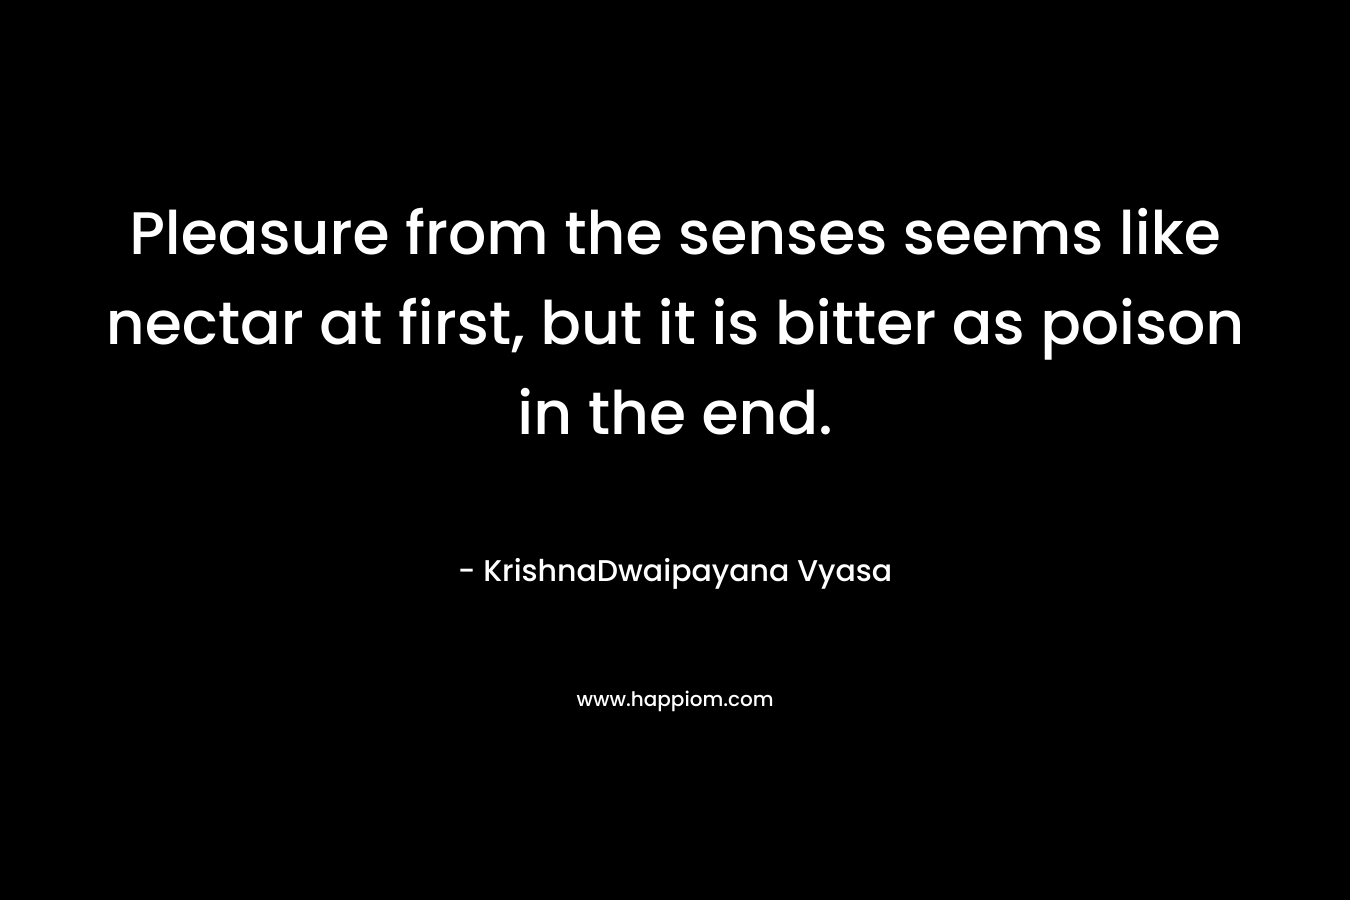 Pleasure from the senses seems like nectar at first, but it is bitter as poison in the end. – KrishnaDwaipayana Vyasa